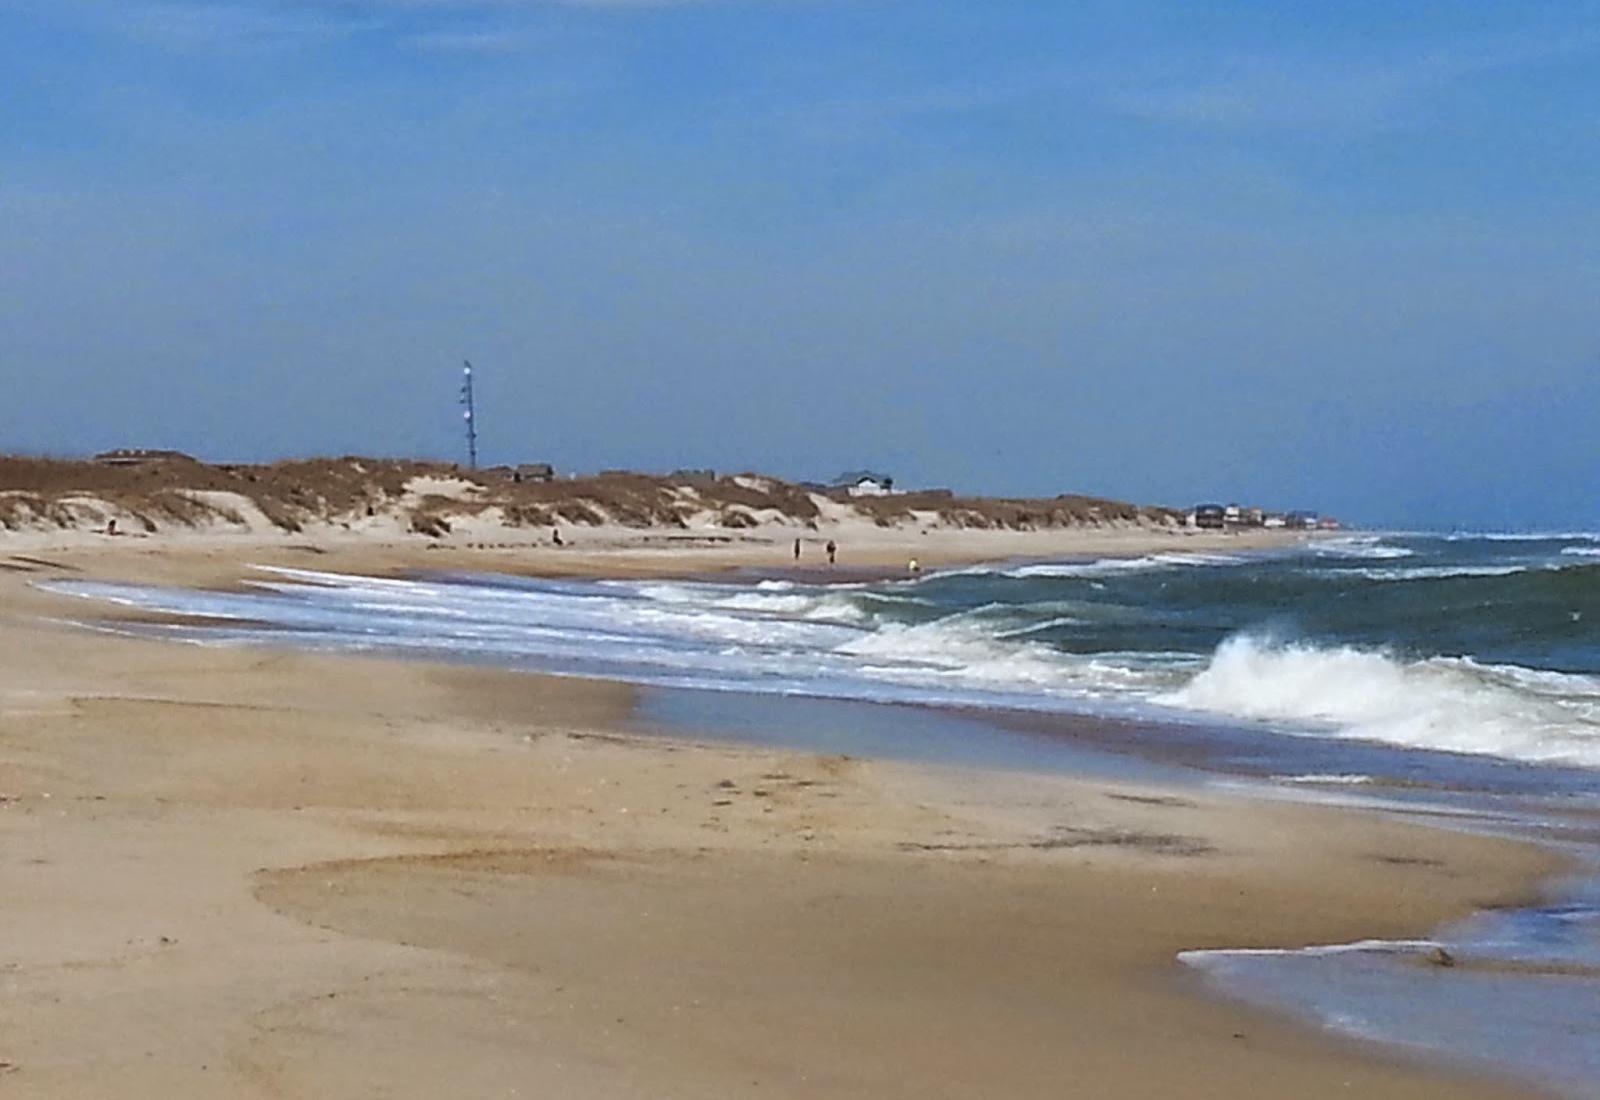 Sandee - South Turns Just North Of Rodanthe